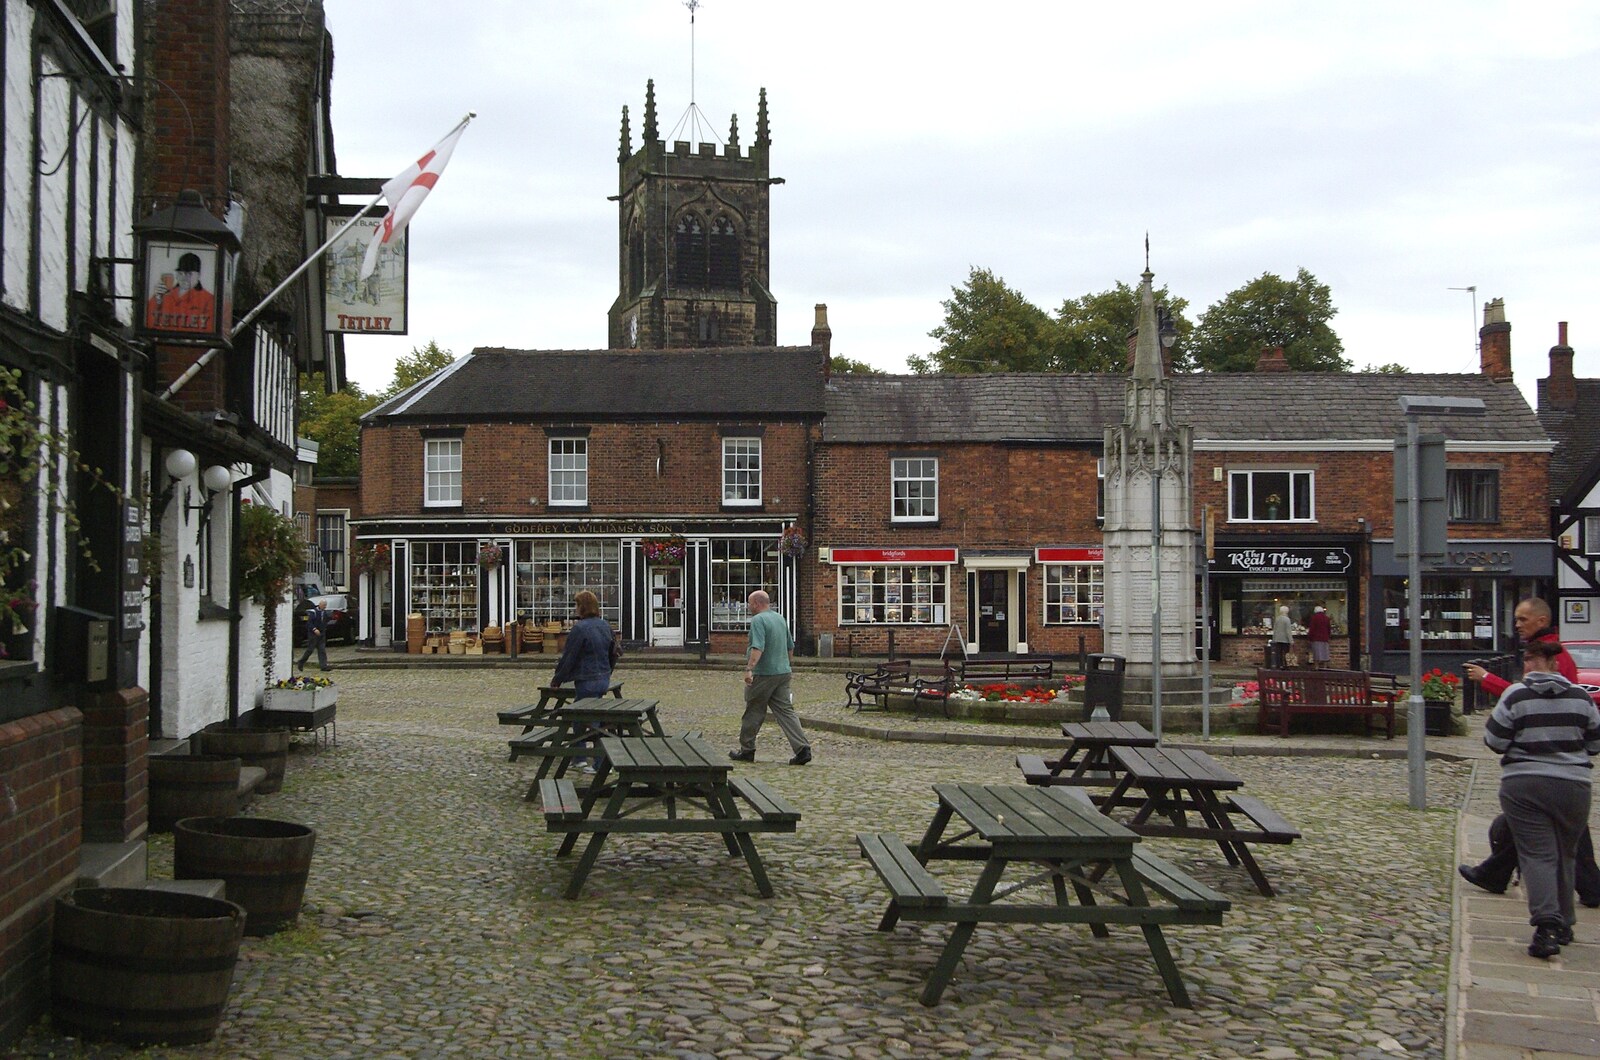 The square outside the Black Bear from A Road Trip to Ireland Via Sandbach and Conwy, Cheshire and Wales - 21st September 2007